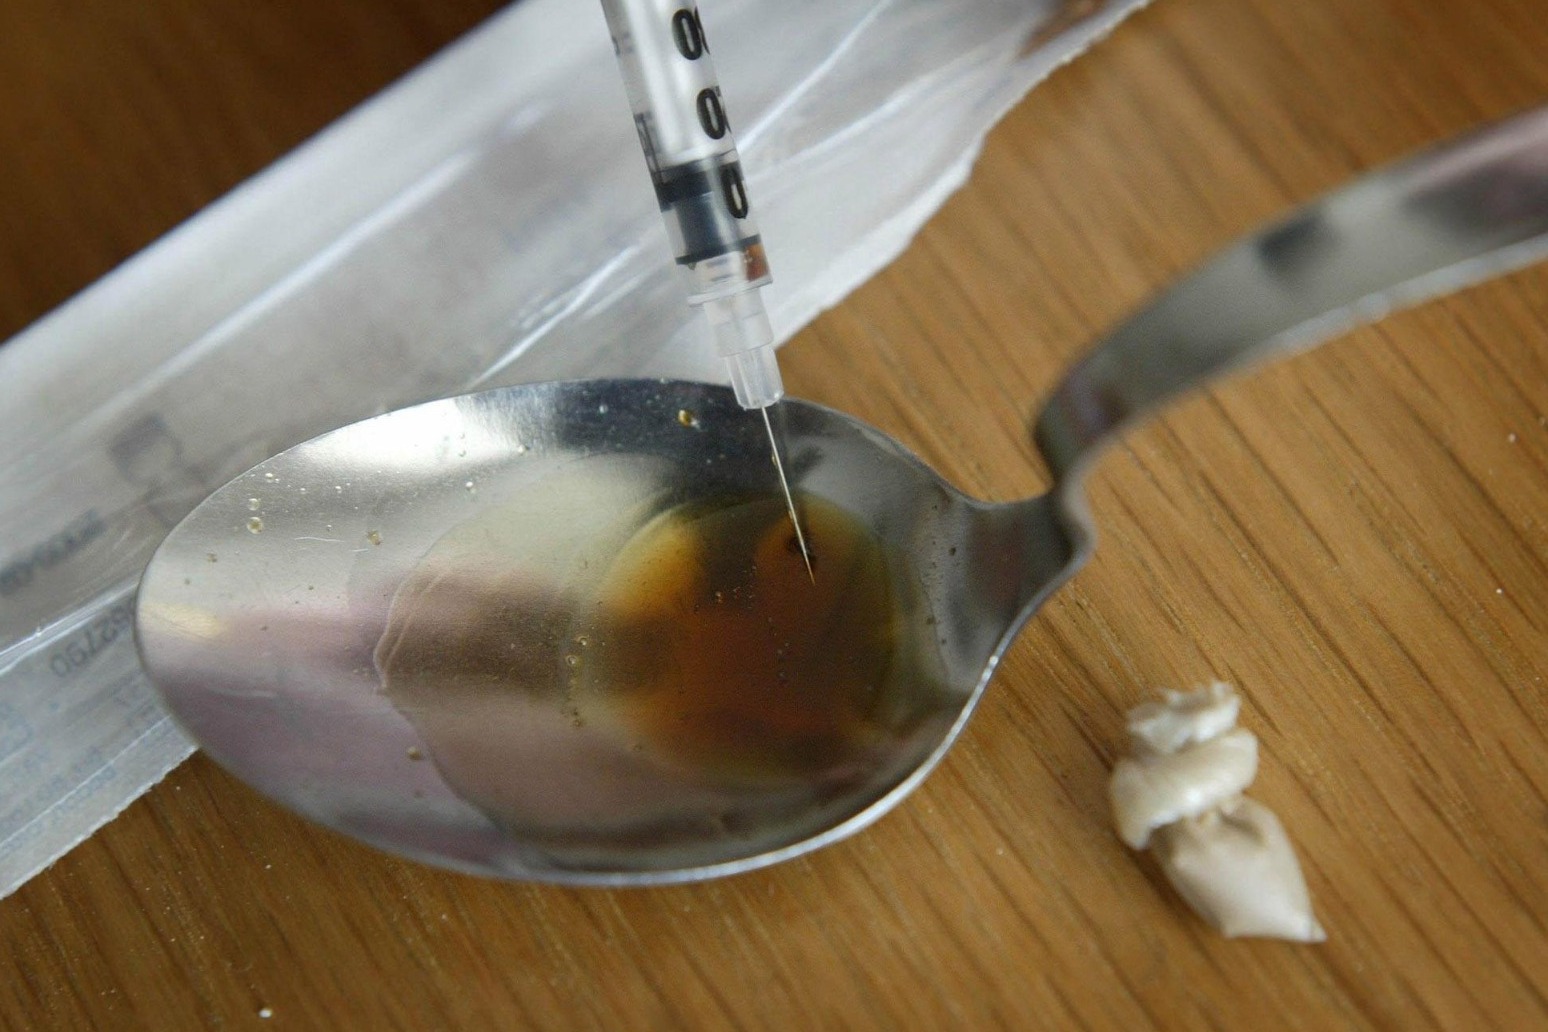 Drug recovery services across England to expand due to £421m funding 